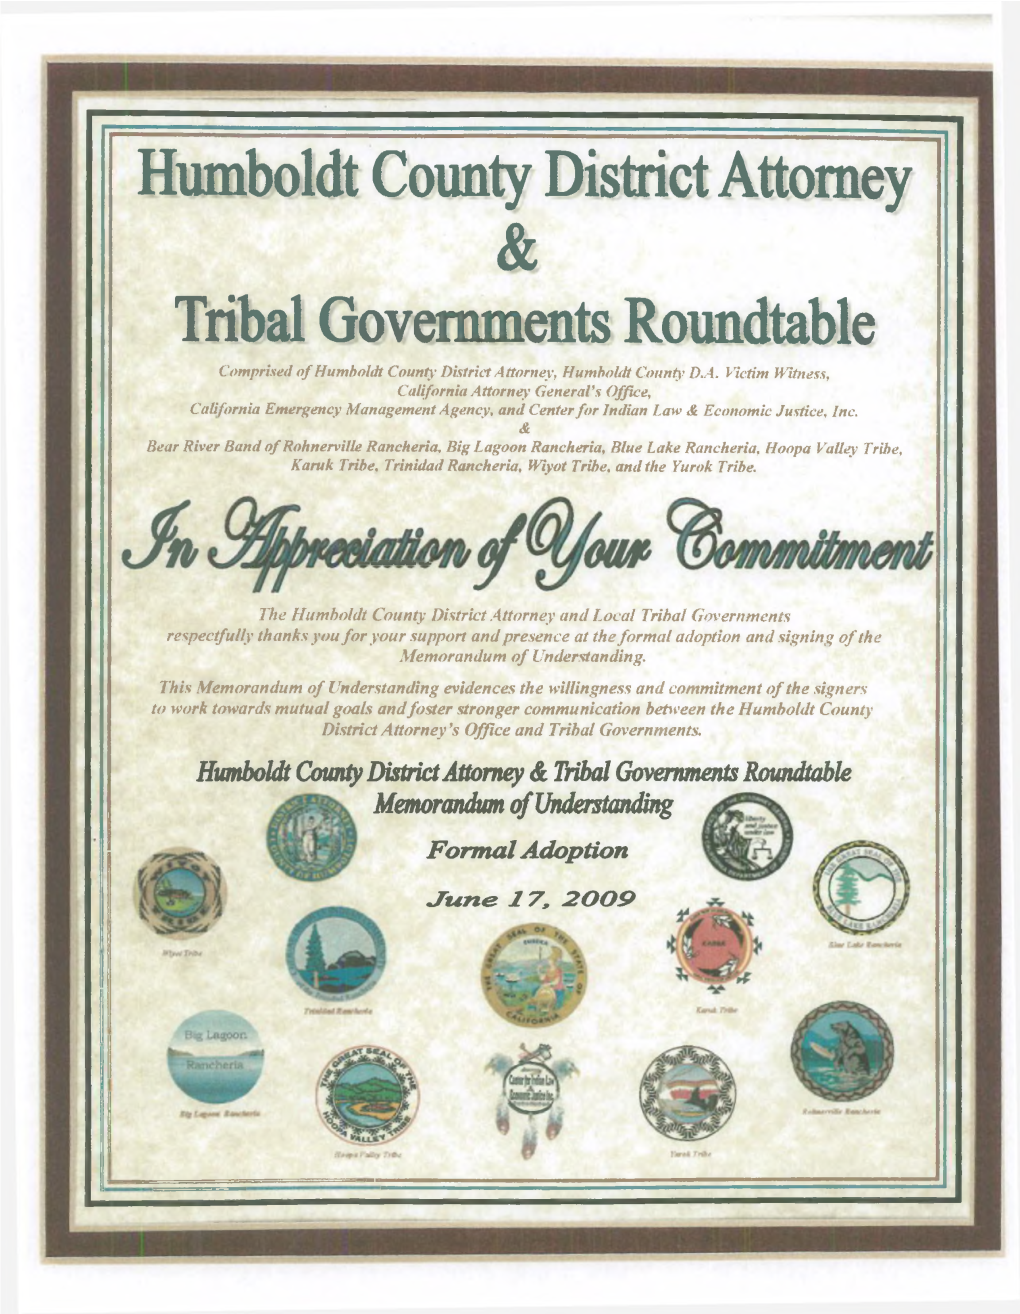 Humboldt County District Attorney & Tribal Governments Roundtable